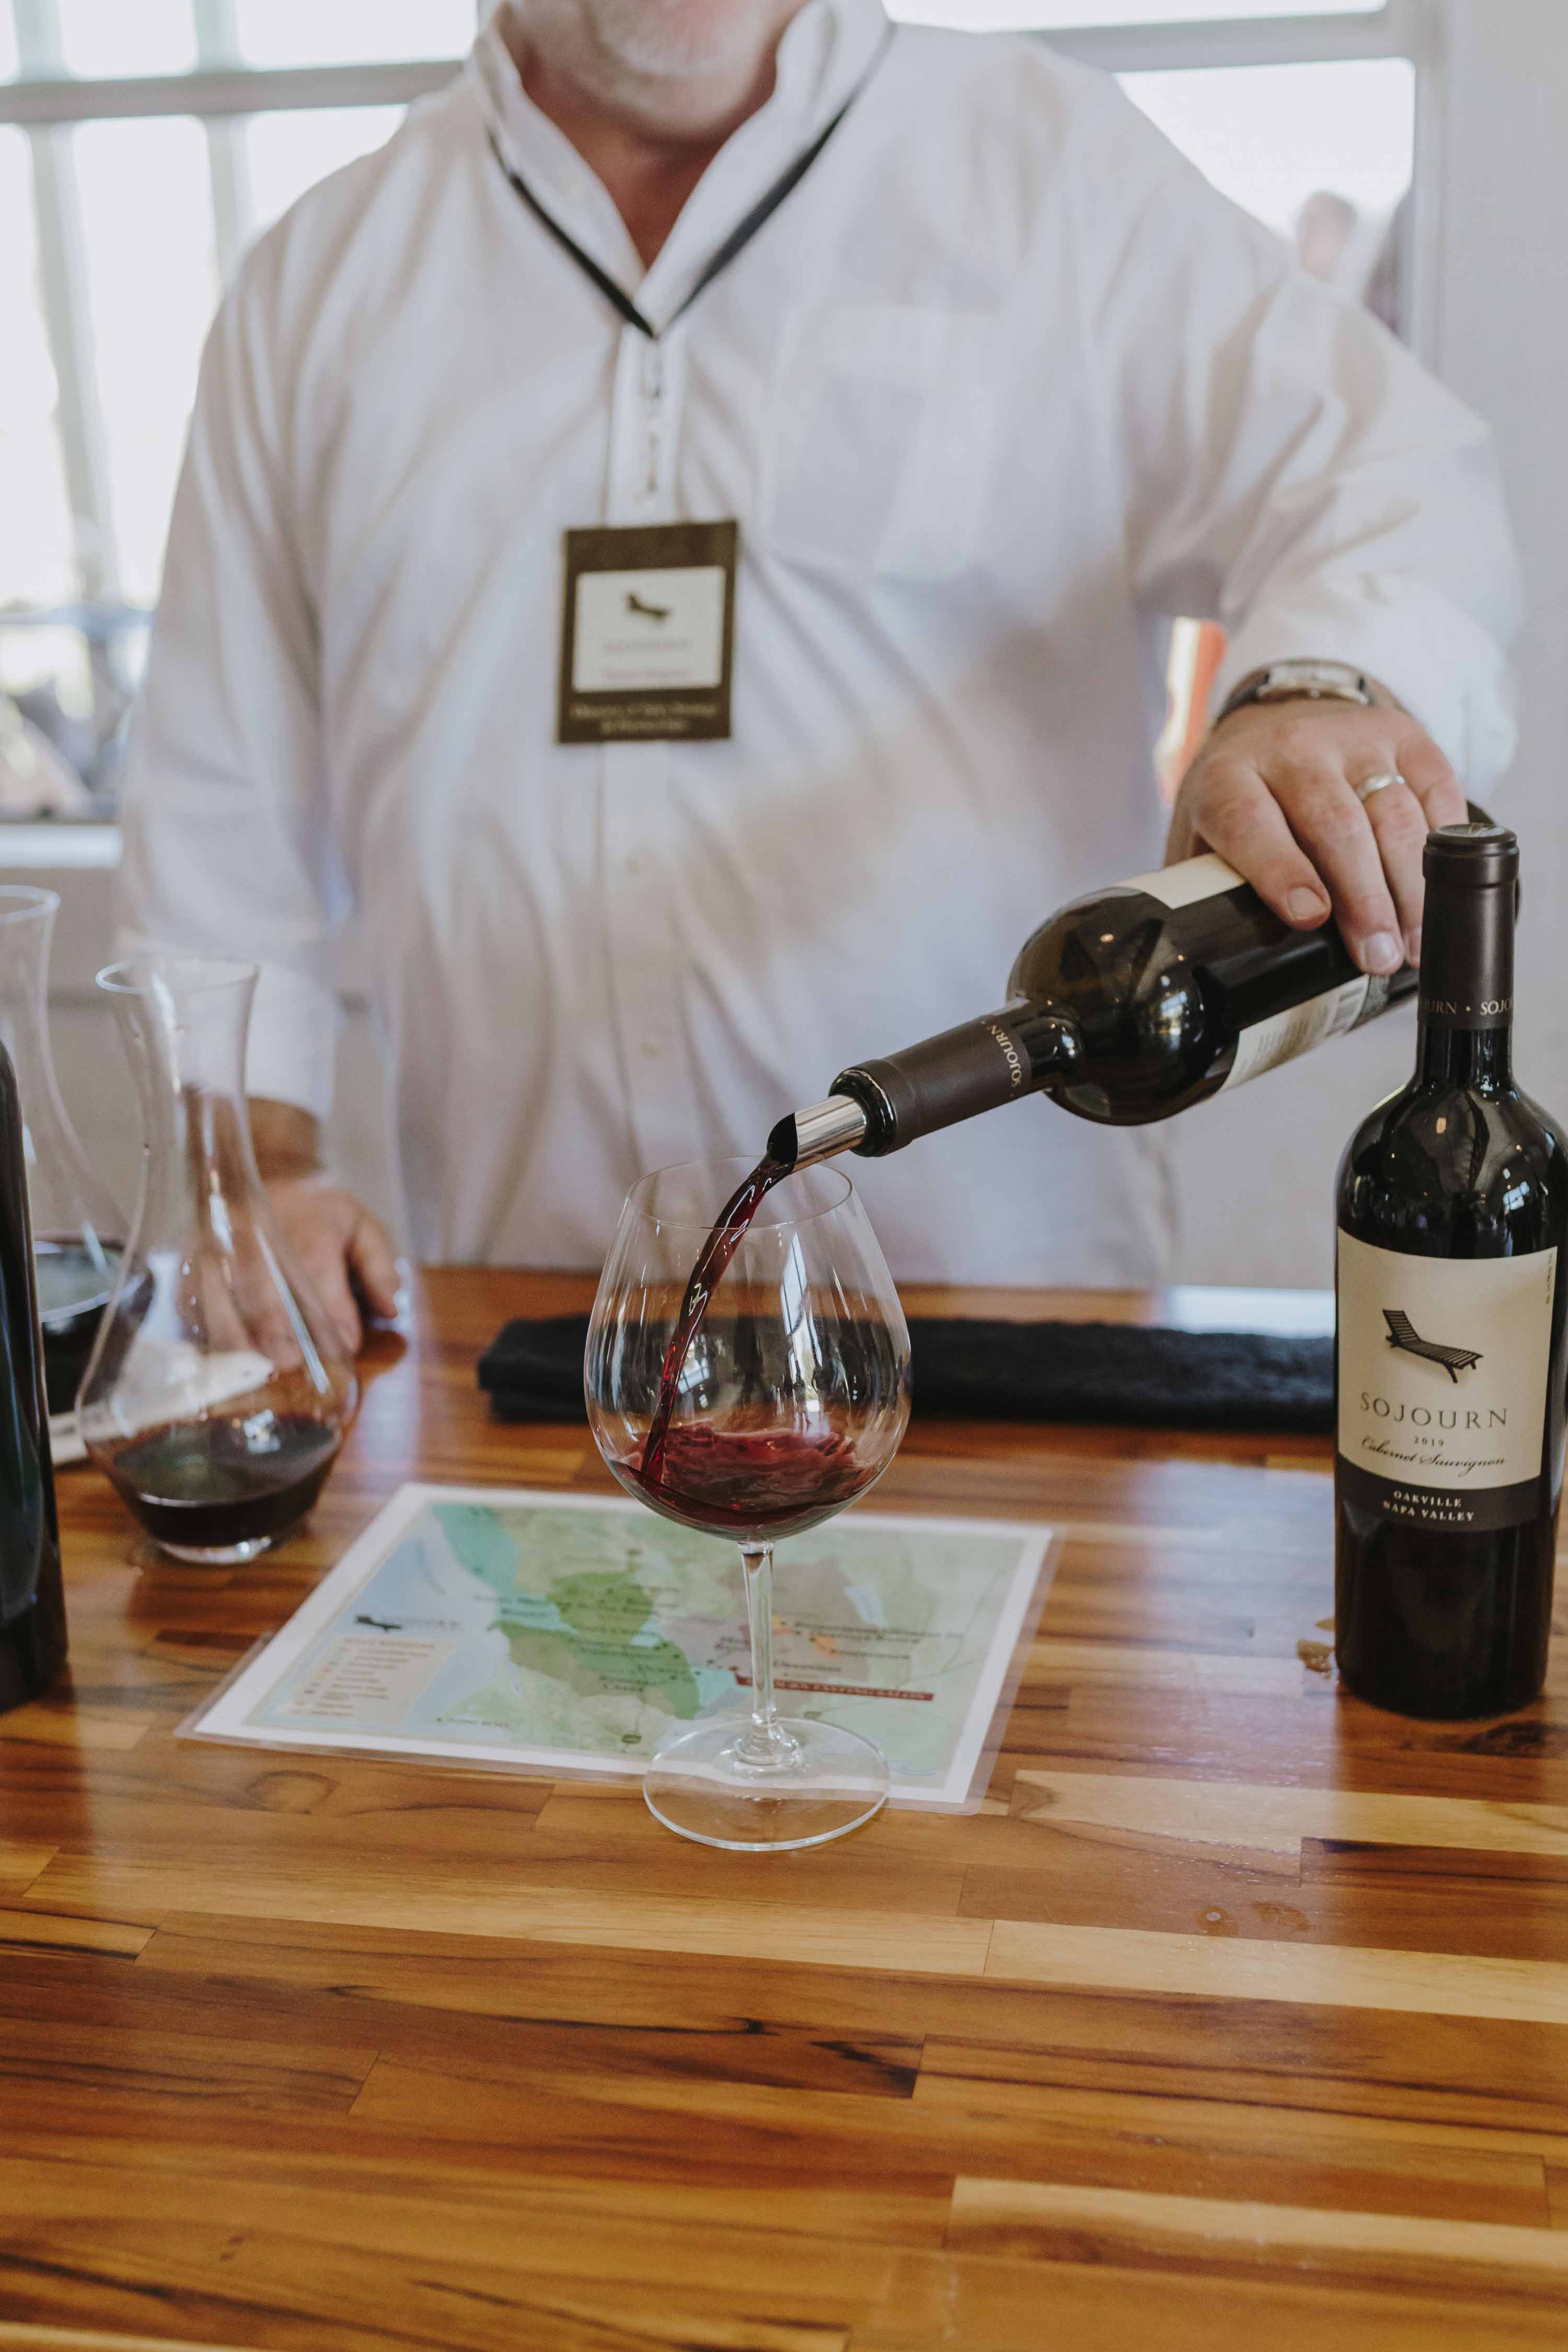 Sommelier pouring a glass of Sojourn cabernet